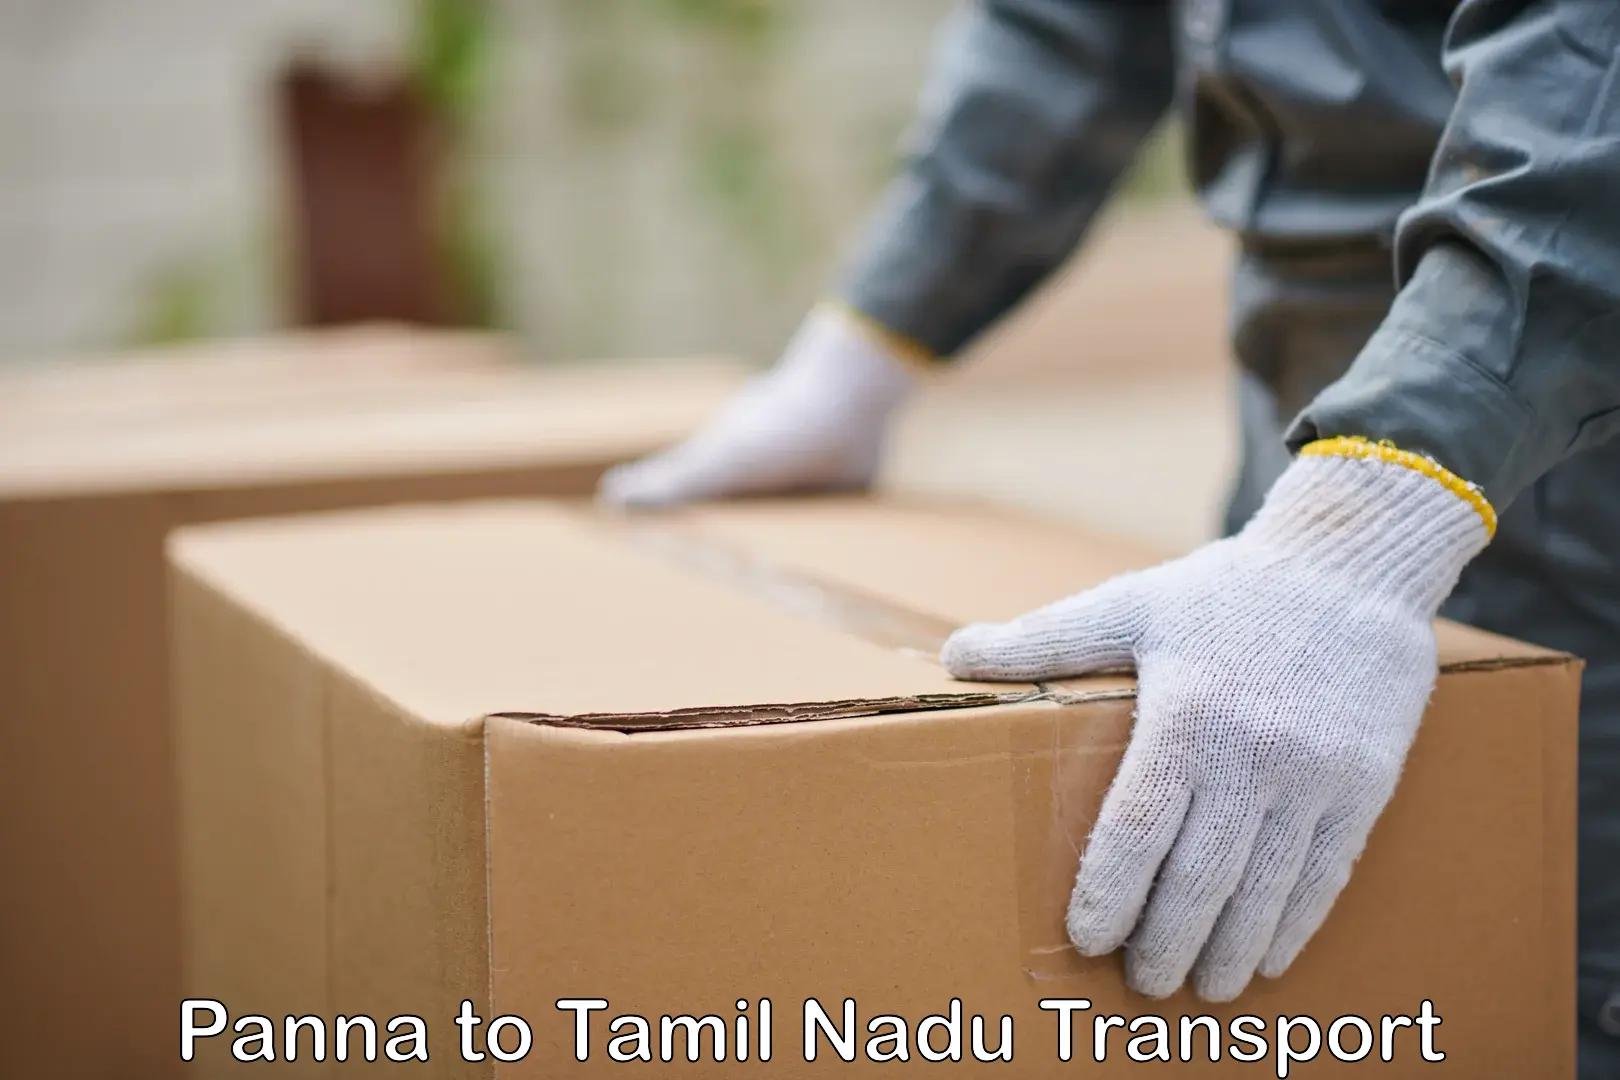 Daily parcel service transport Panna to Meenakshi Academy of Higher Education and Research Chennai